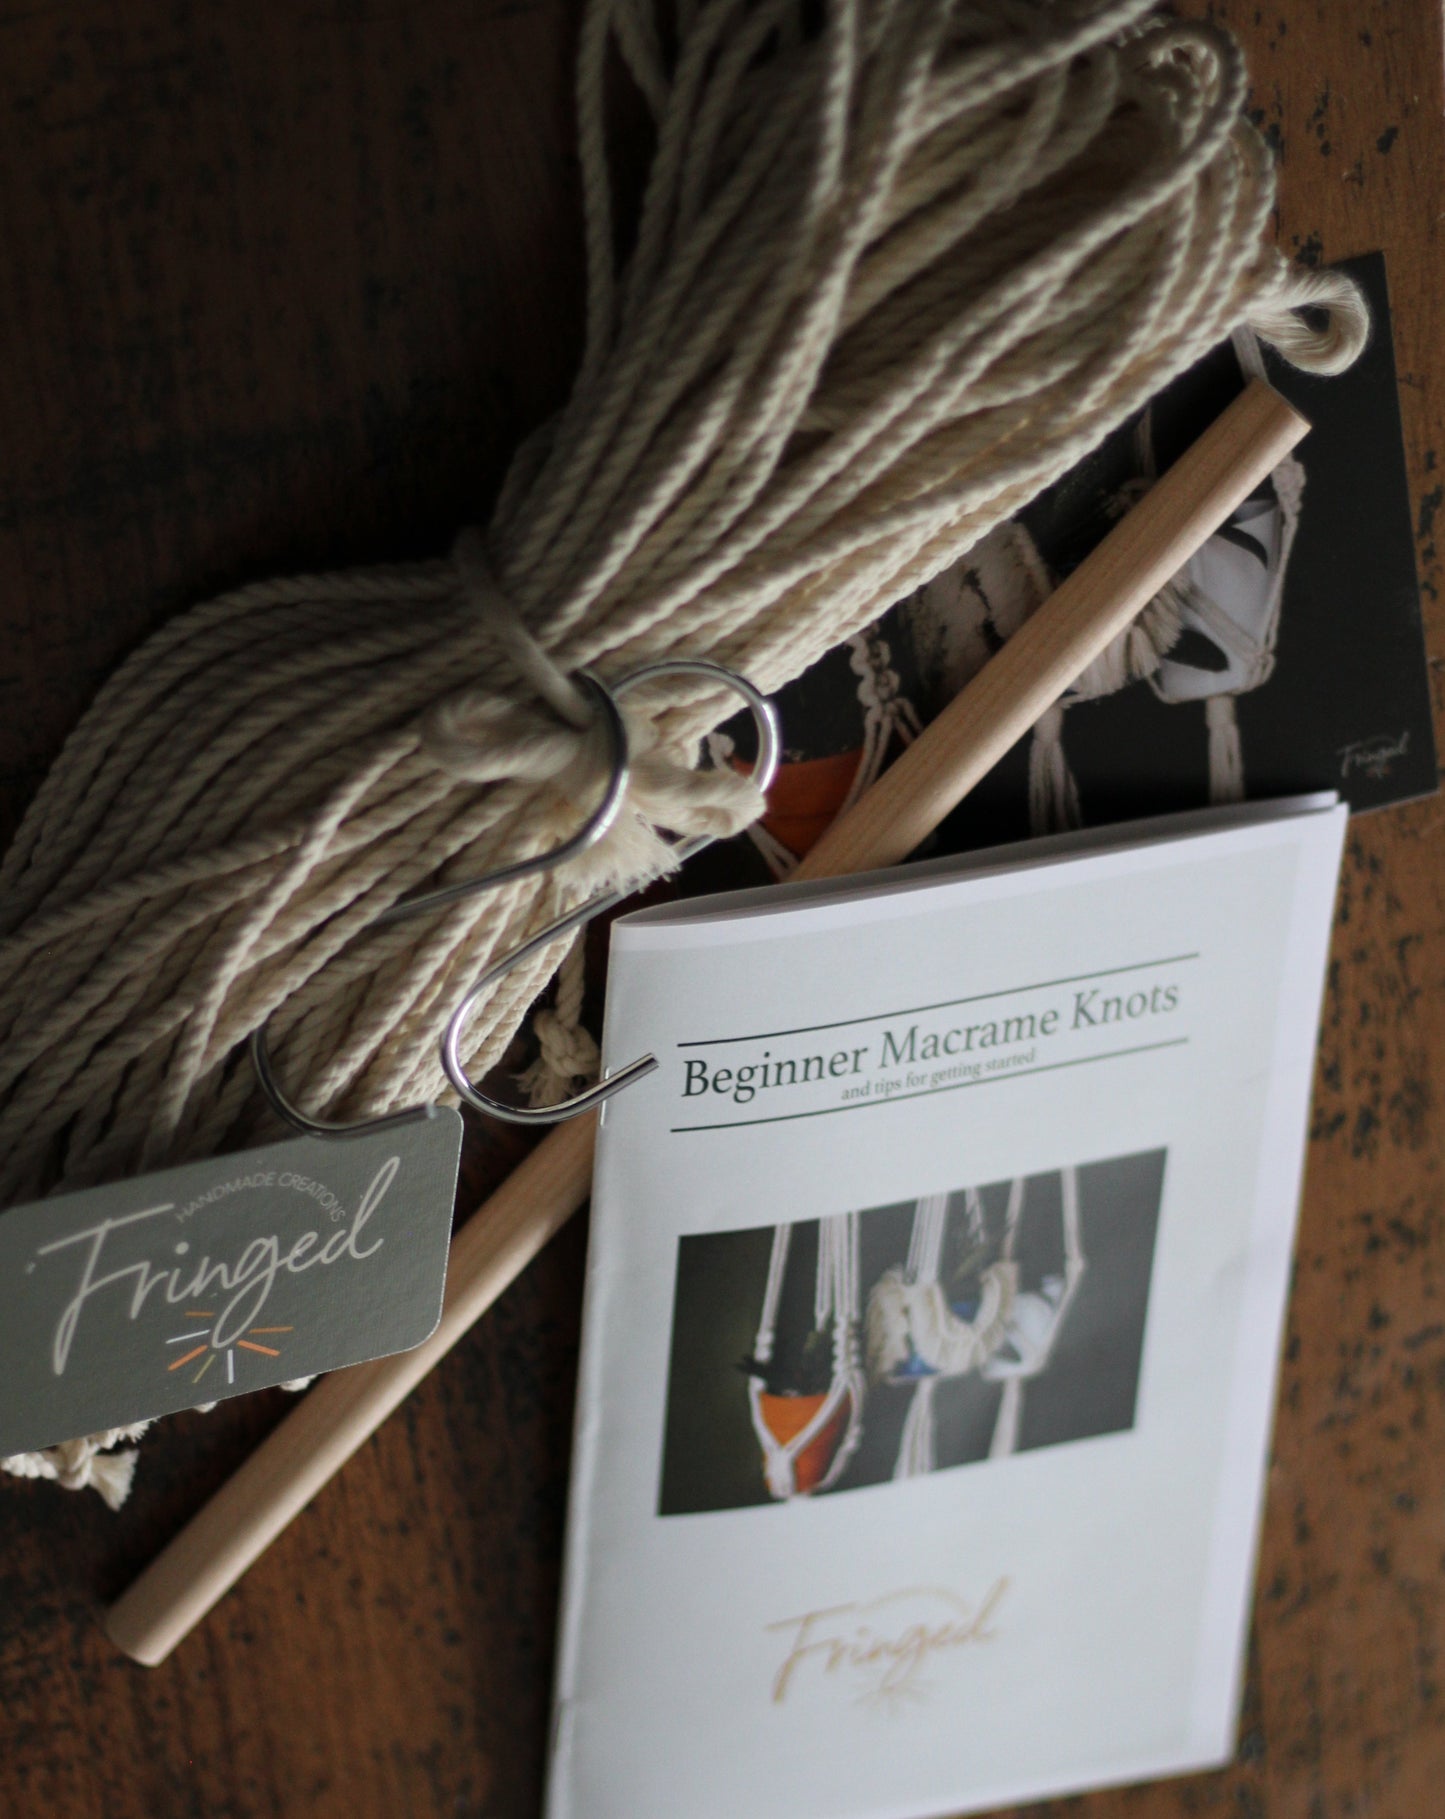 DIY Juniper Wall Hanging Kit with Macrame knots guide/instructions